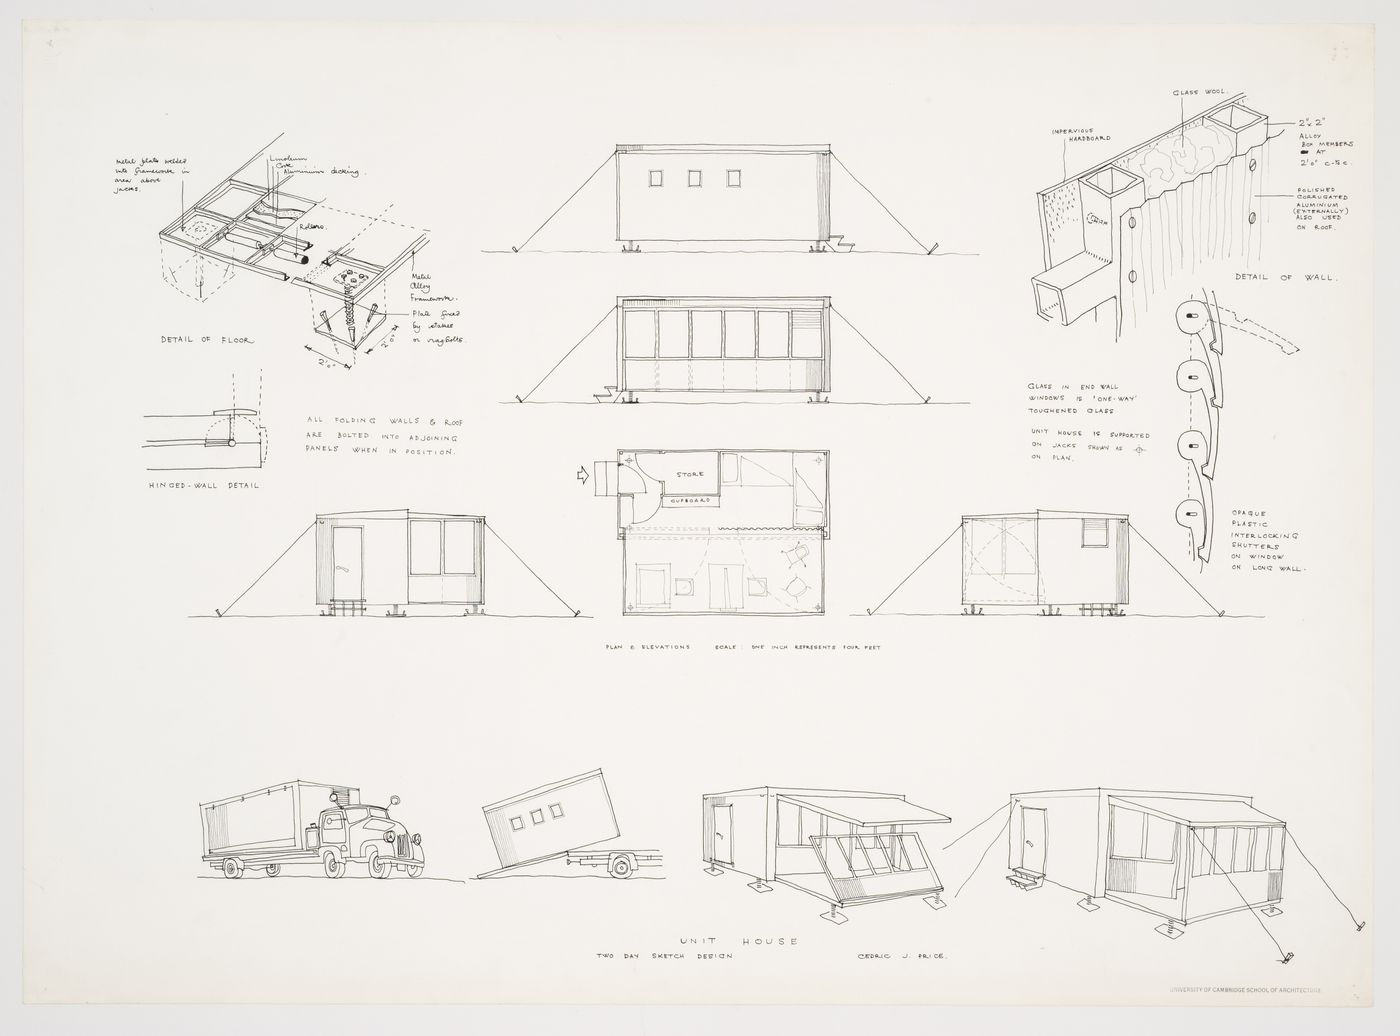 Unit House: plan, elevations, details and sketches showing transport and enlargement of the house